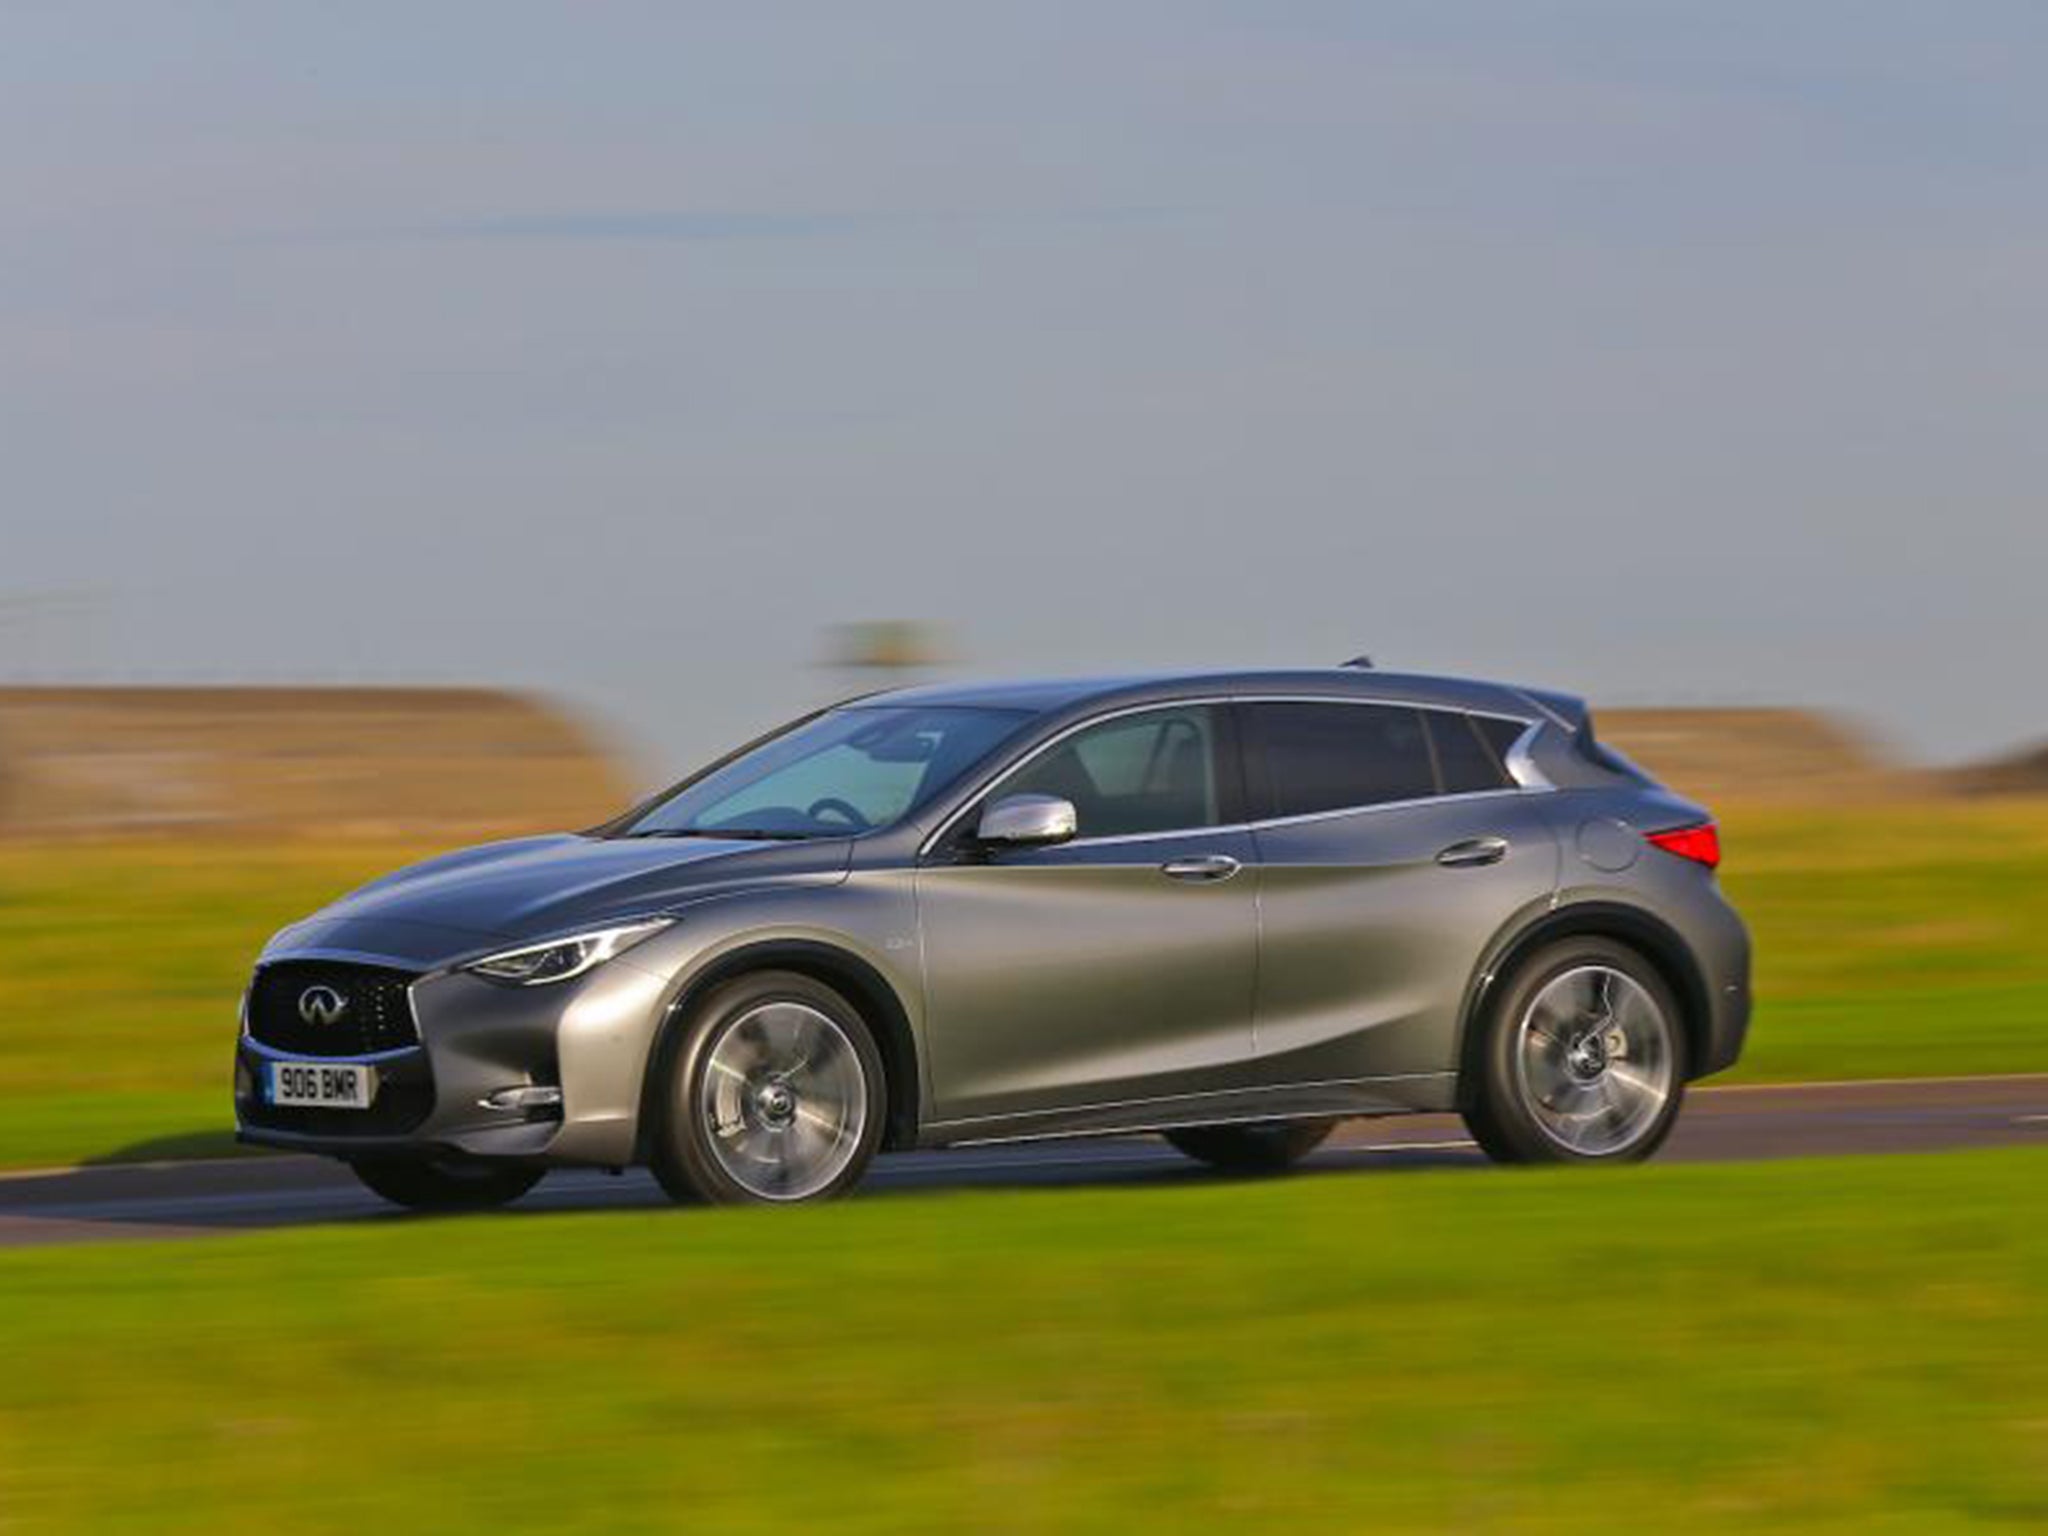 This AWD model of the Infiniti feels quite potent